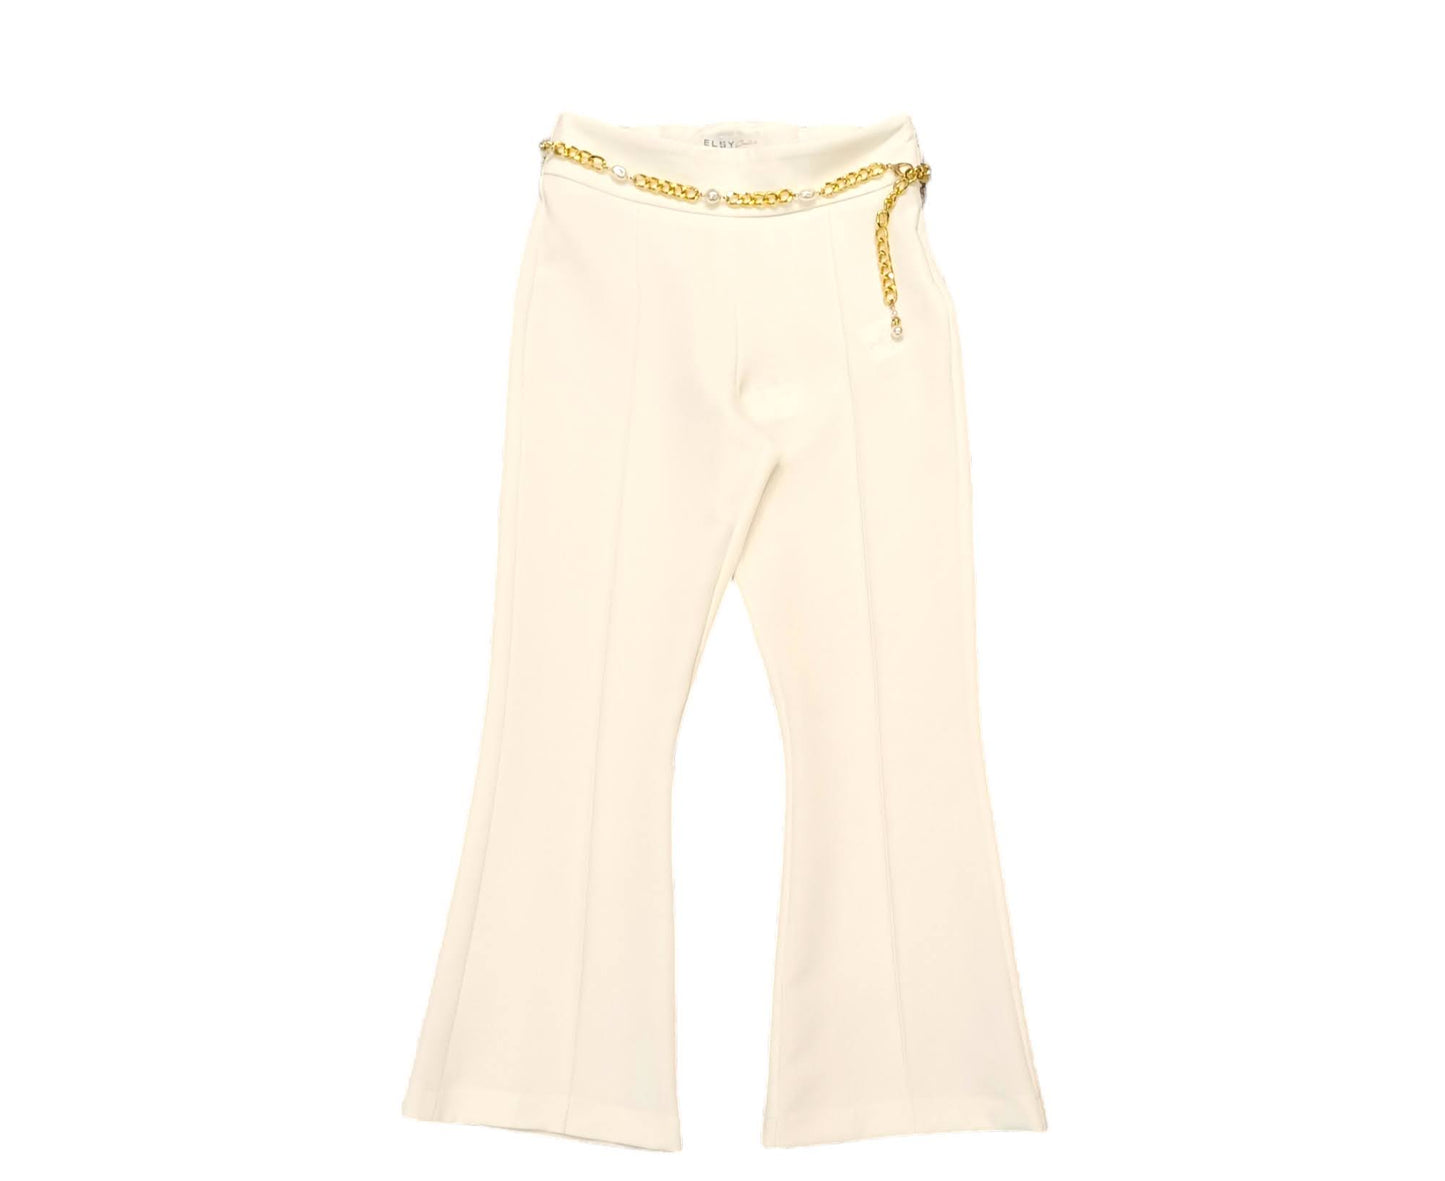 ELSY Couture Cream-Gold Jacket+Pants Suit